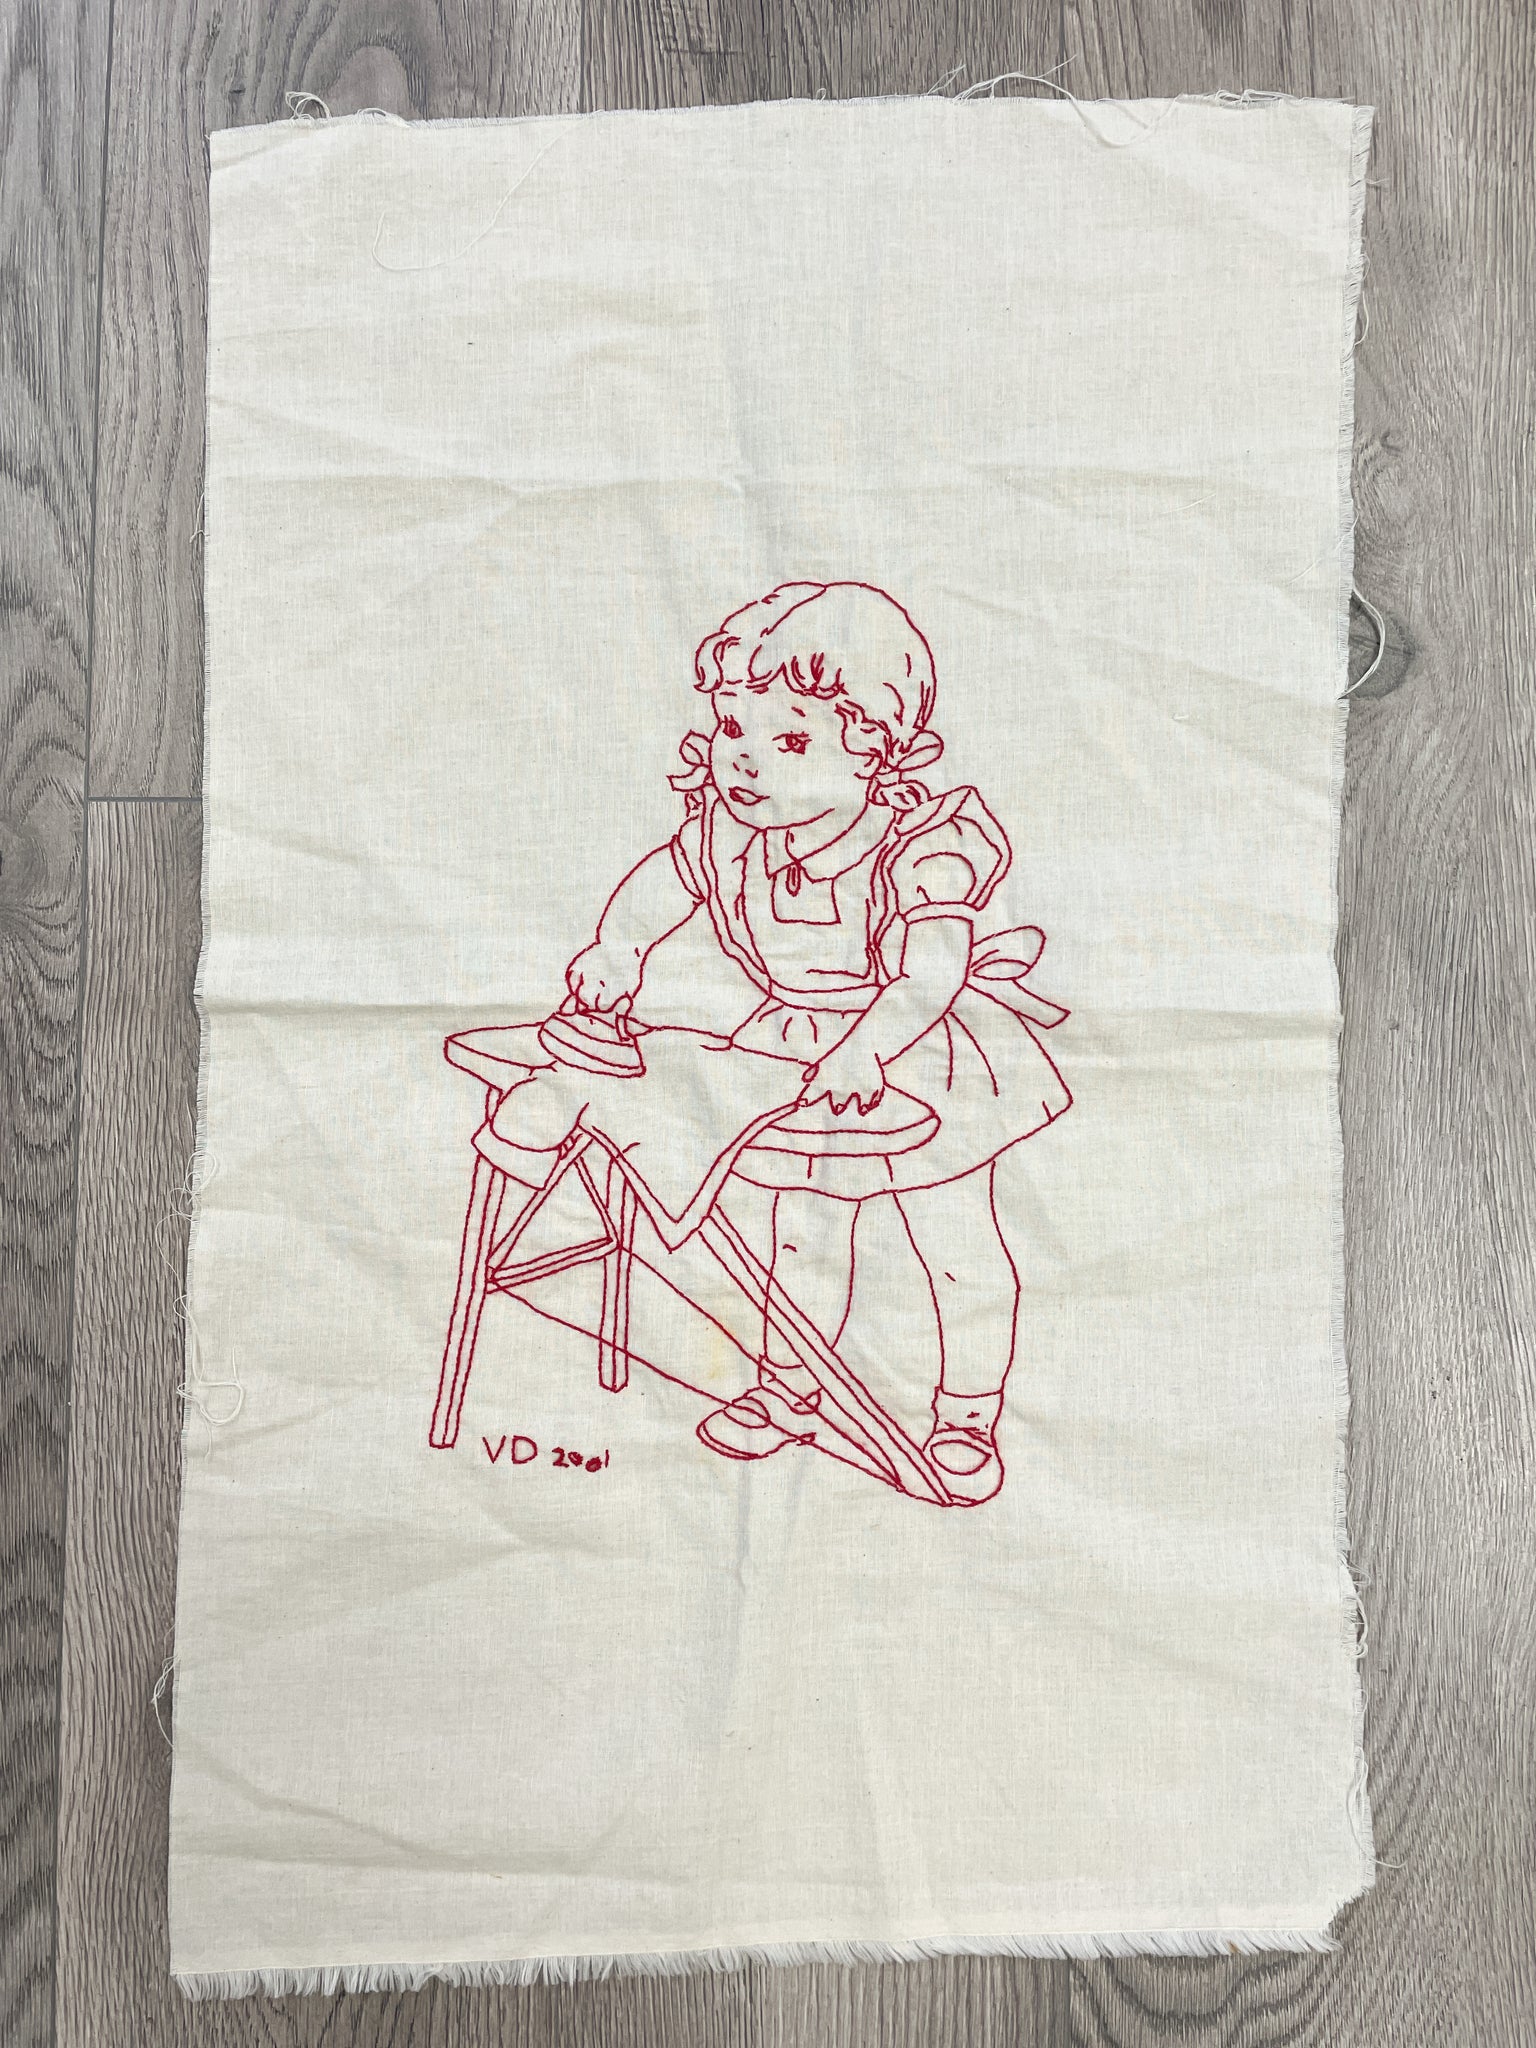 Red Work Embroidery on Cotton Batiste - Girl Ironing